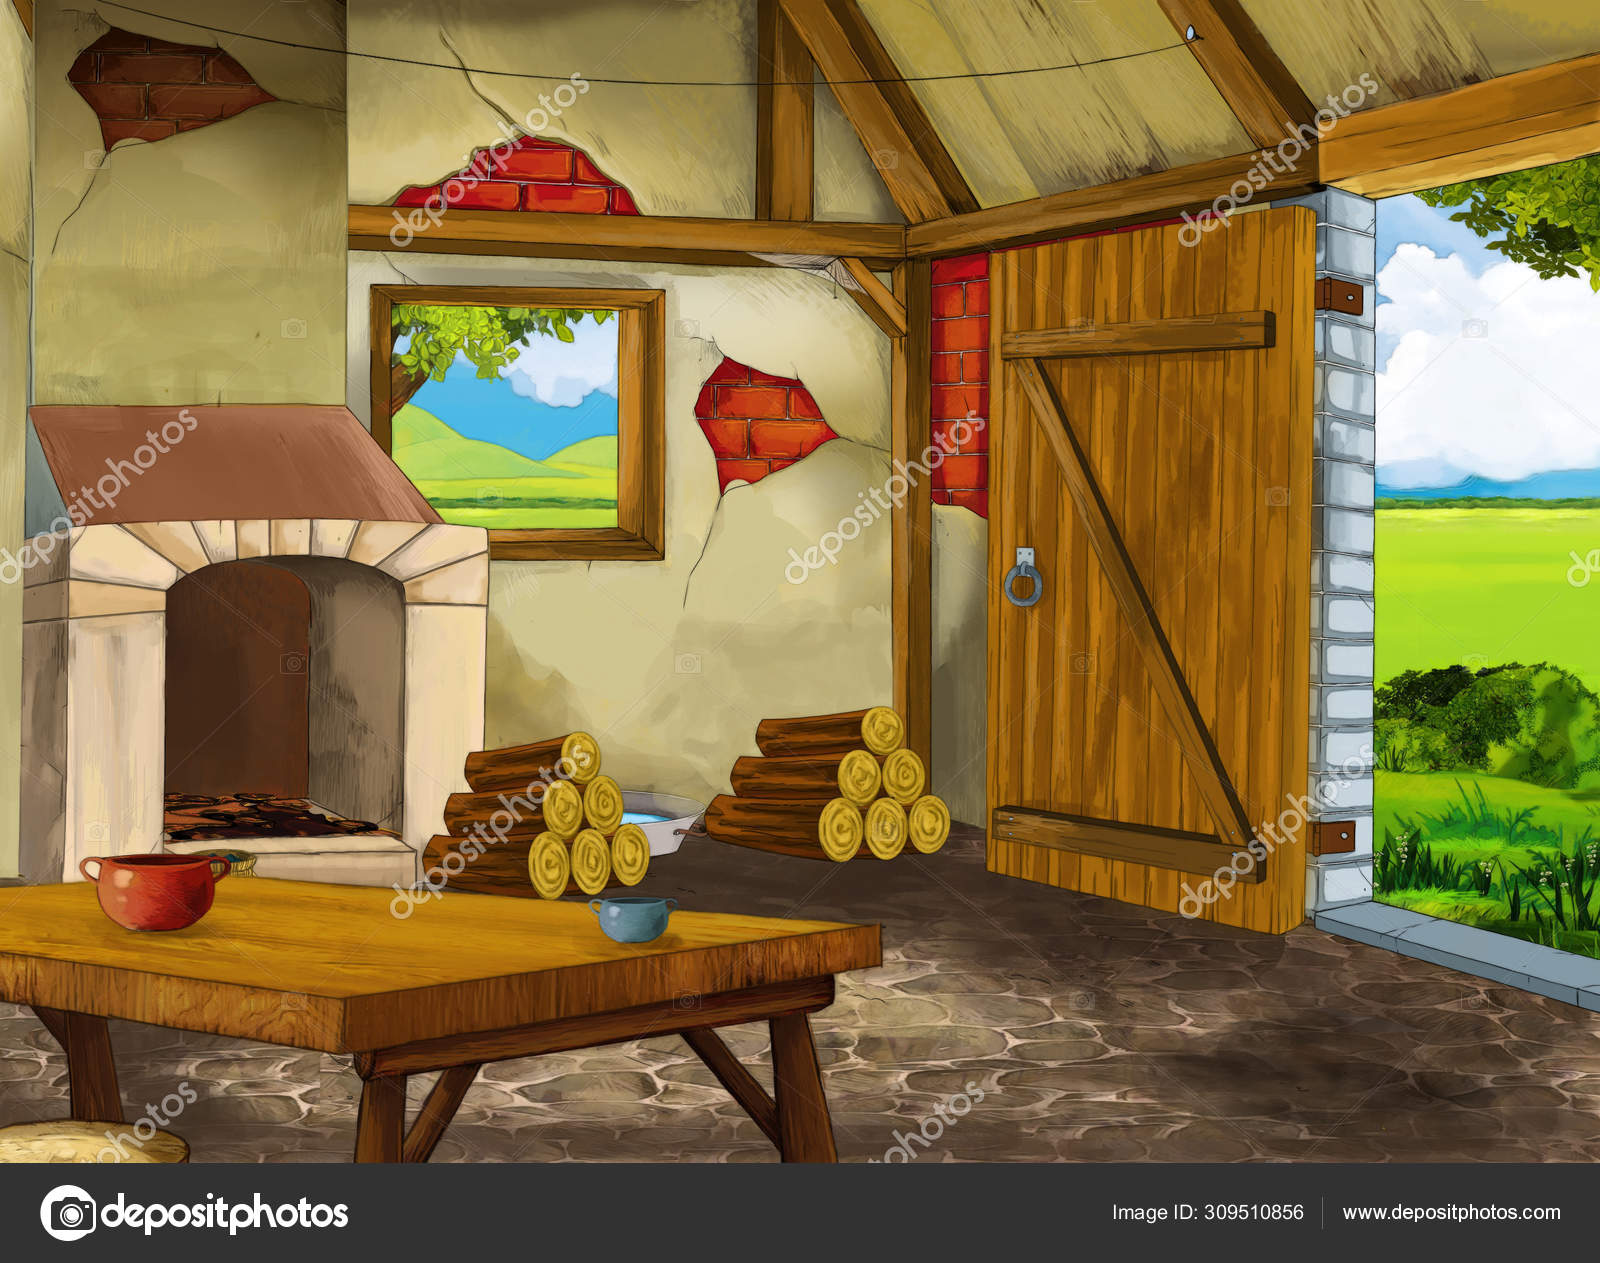 Cartoon scene with old kitchen in farm house with nobody on the stage -  illustration for children Stock Photo by ©illustrator_hft 309510856